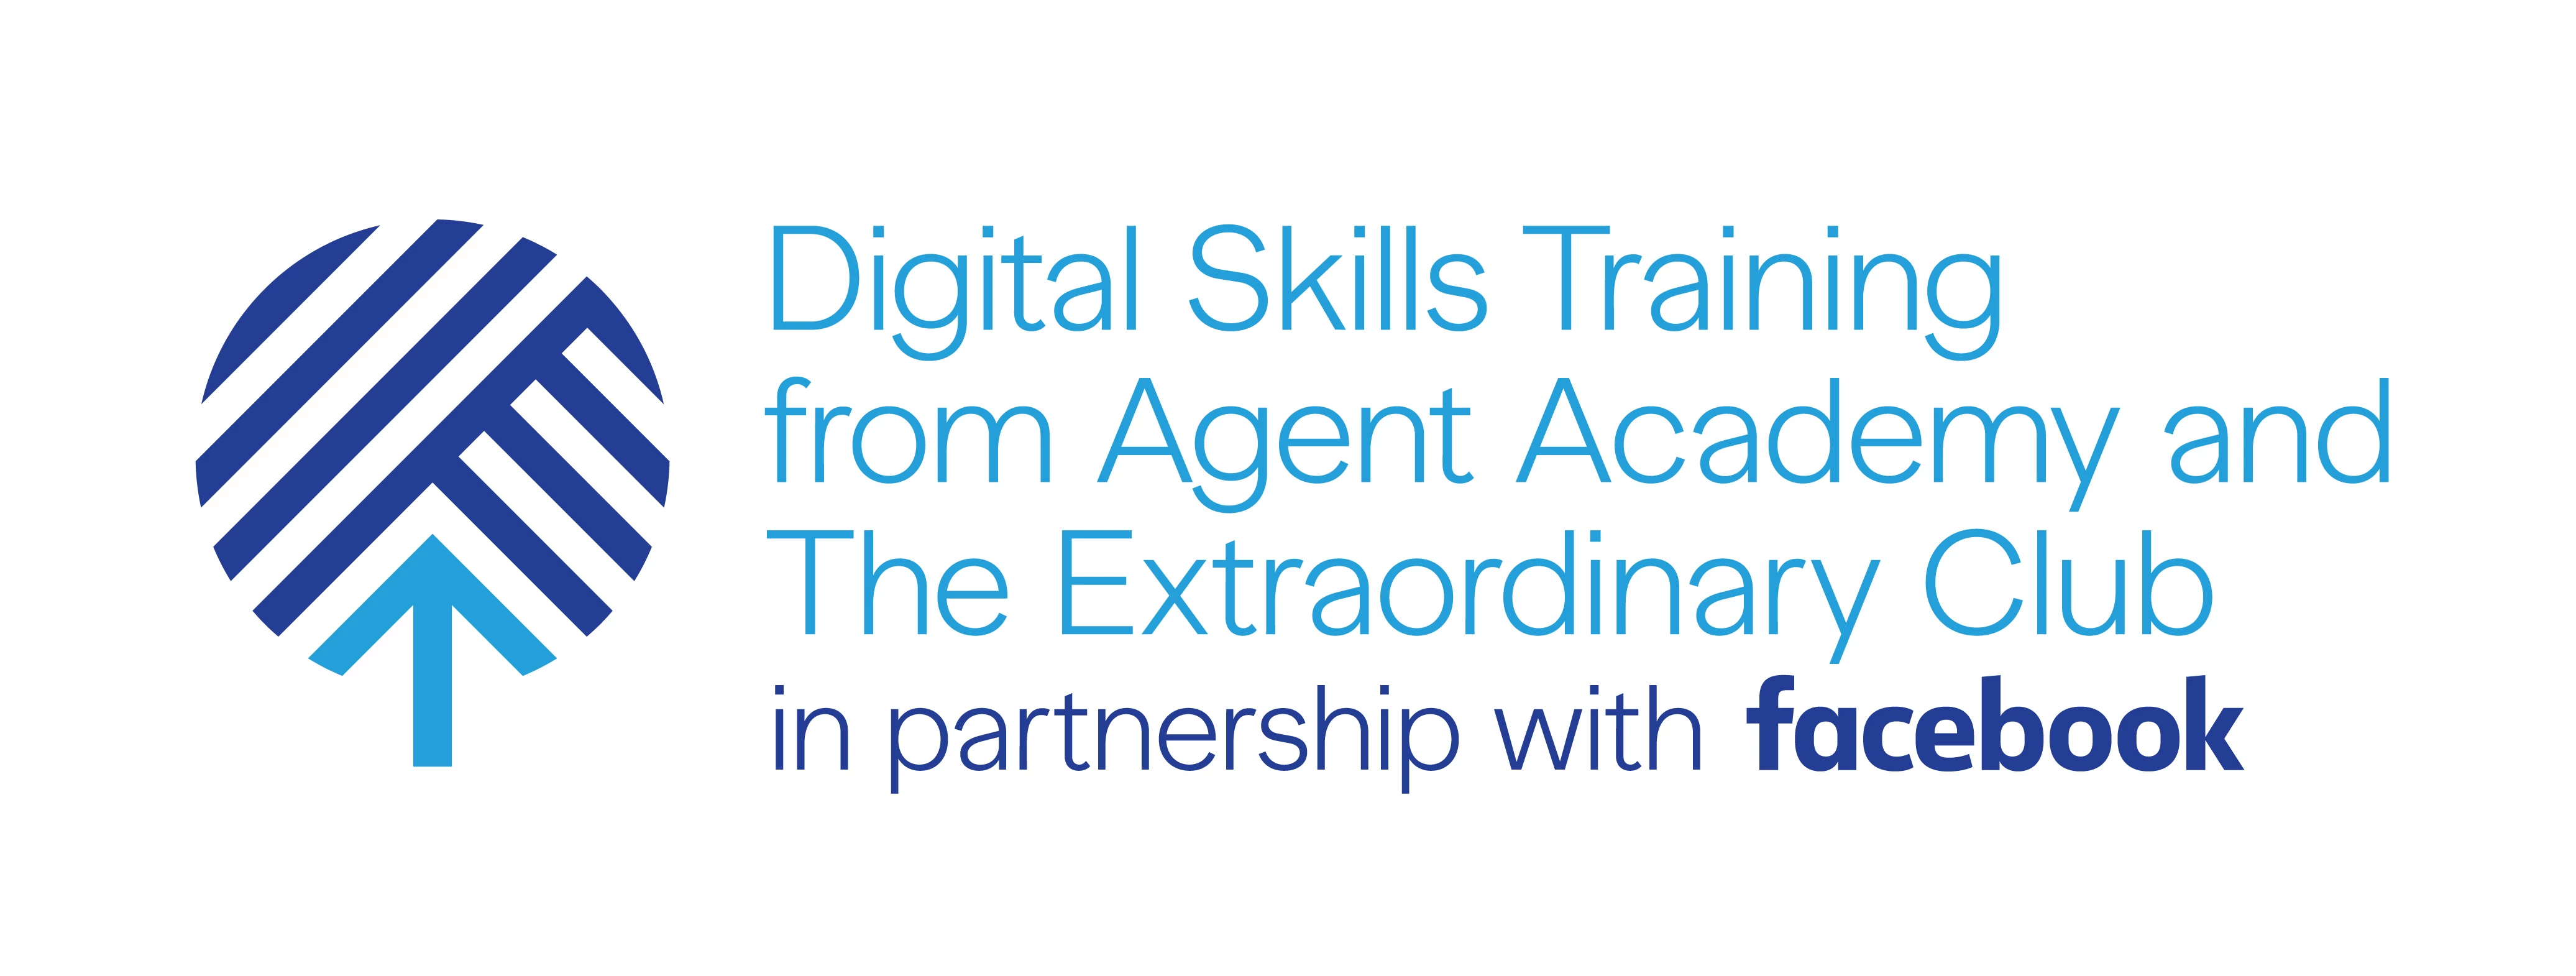 AGENT ACADEMY AND THE EXTRAORDINARY CLUB PARTNER WITH FACEBOOOK TO DELIVER DIGITAL SKILLS TRAINING IN THE NORTH WEST